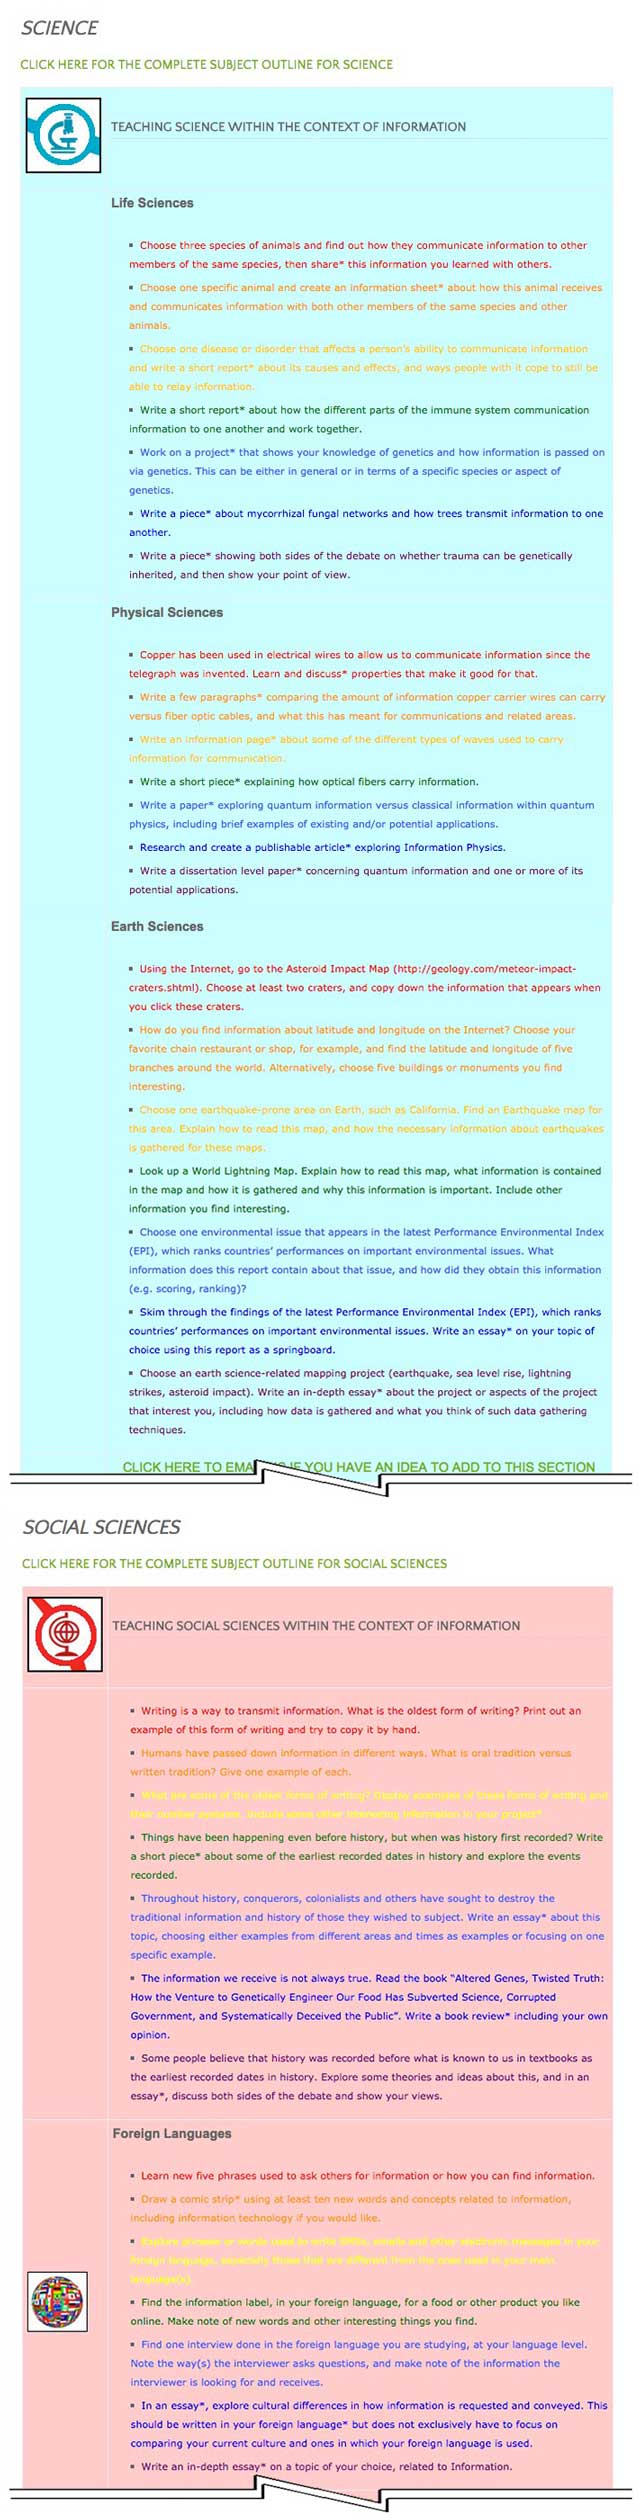 This last week the core team transferred the third 25% of the written content for the Information Lesson Plan to the website, as you see here. This lesson plan purposed to teach all subjects, to all learning levels, in any learning environment, using the central theme of “Information” is now 75% completed on our website.